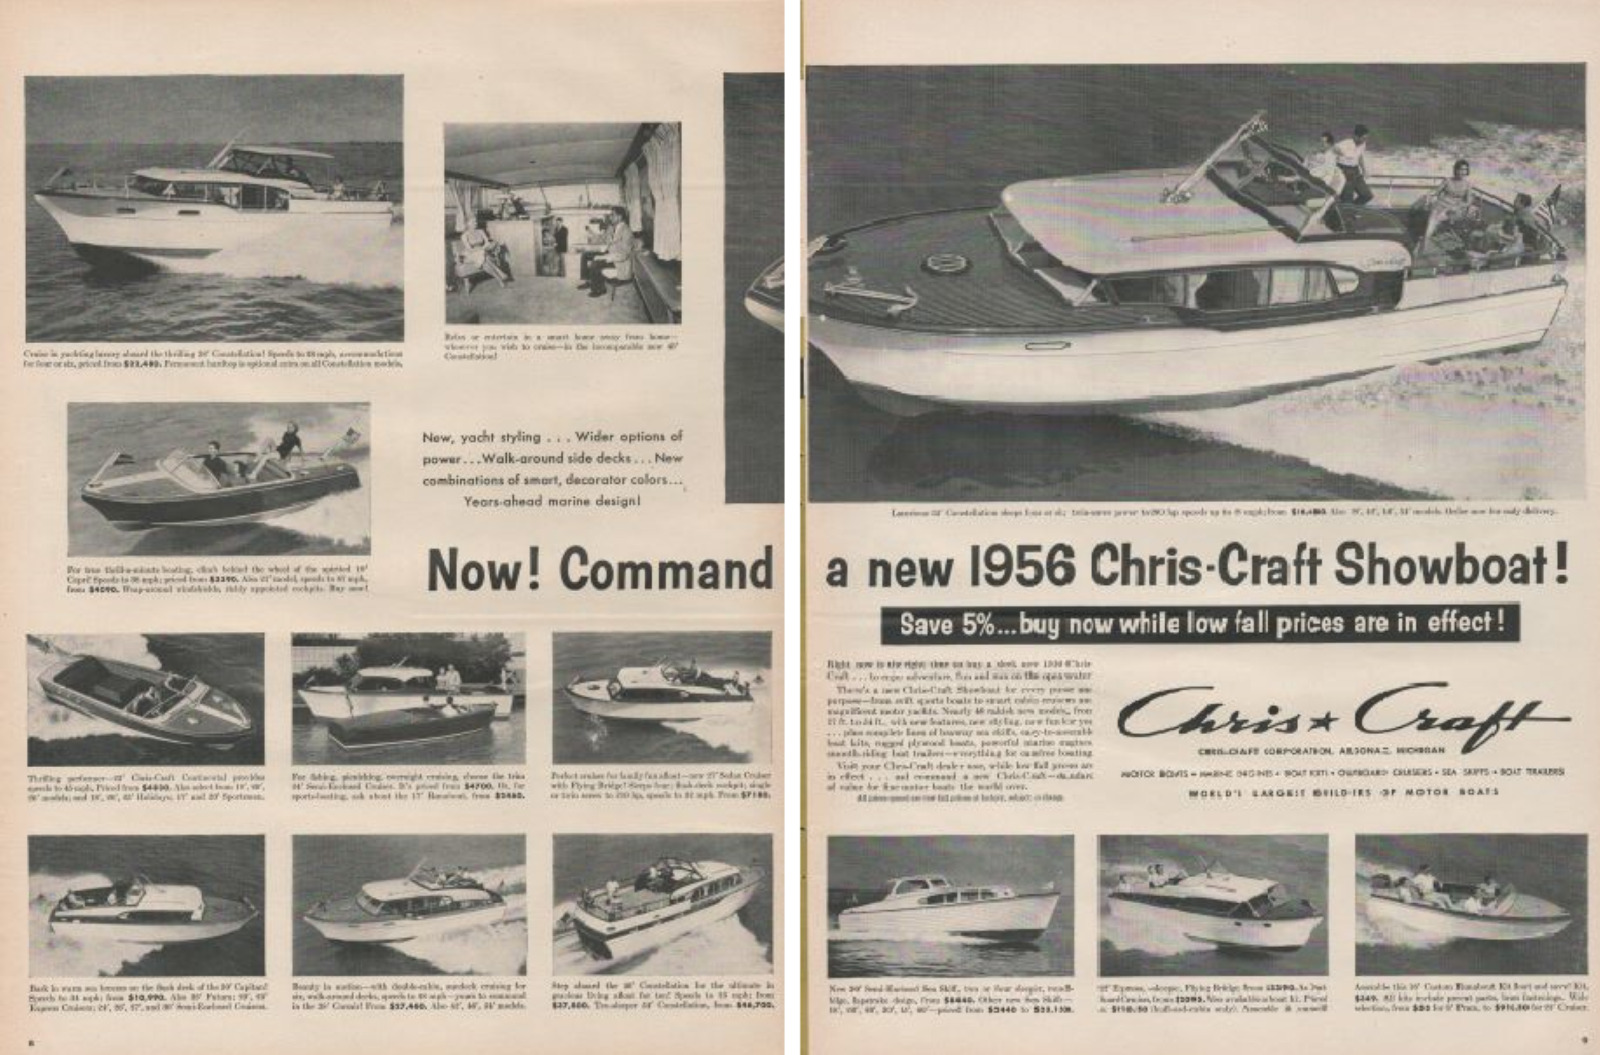 1955 Chris Craft Now Command a New 1956 Chris-Craft Showboat Print Ad 2 Page